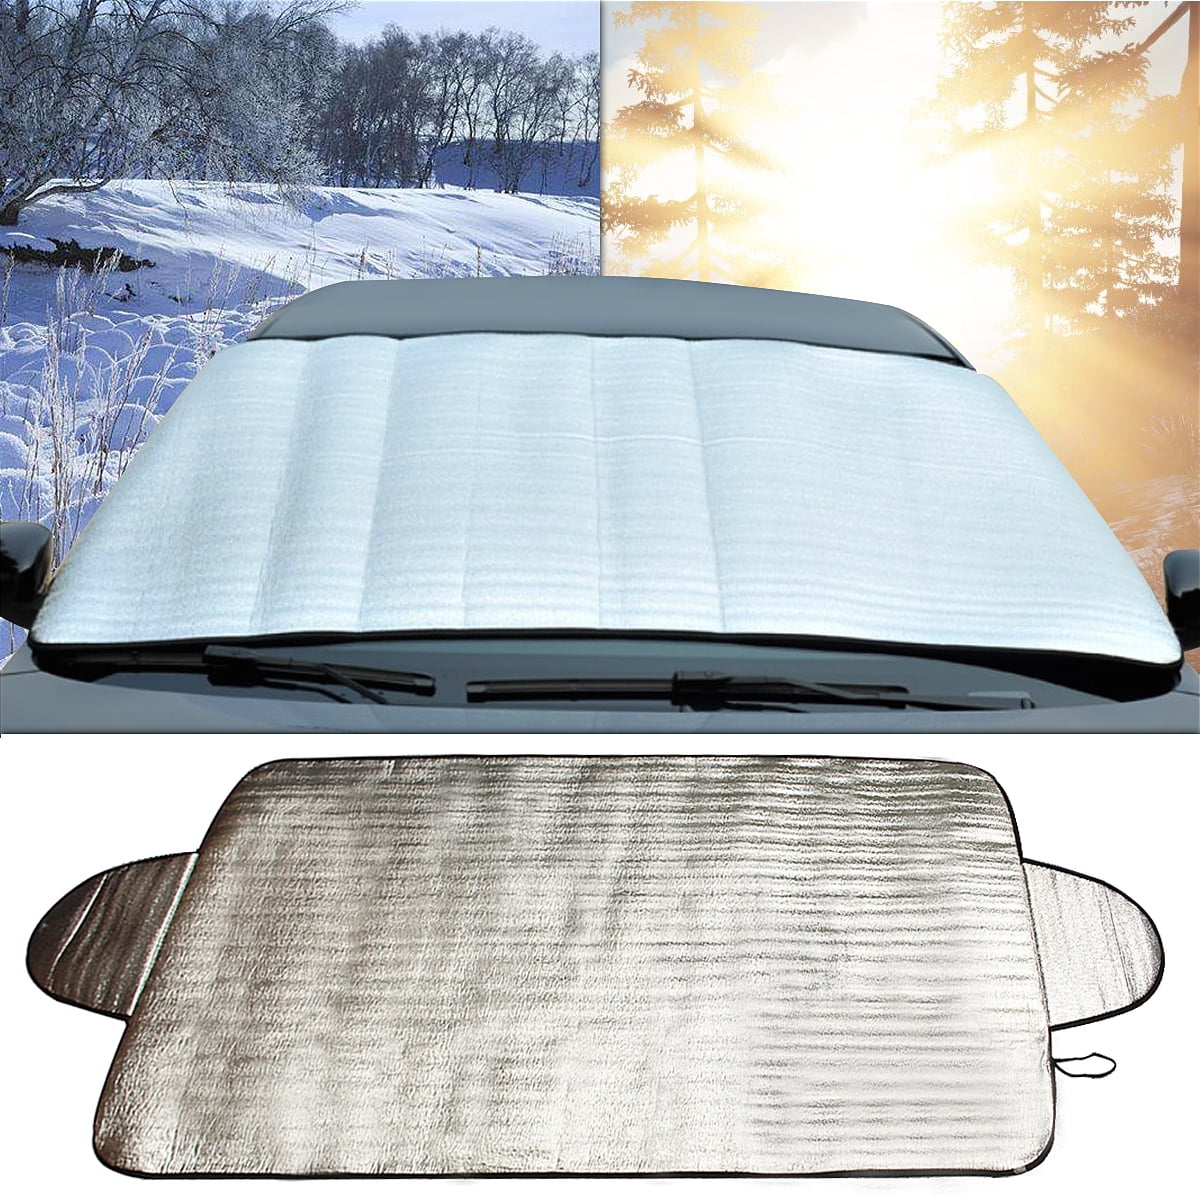 Windshield Sunshade for Car Foldable Front Window Sun Shade Visor Shield Cover UV Ray Snow Ice Frost Reflector Keeps Vehicle Cool 72 X 46.5 Inch Marvin The Martian Planet 